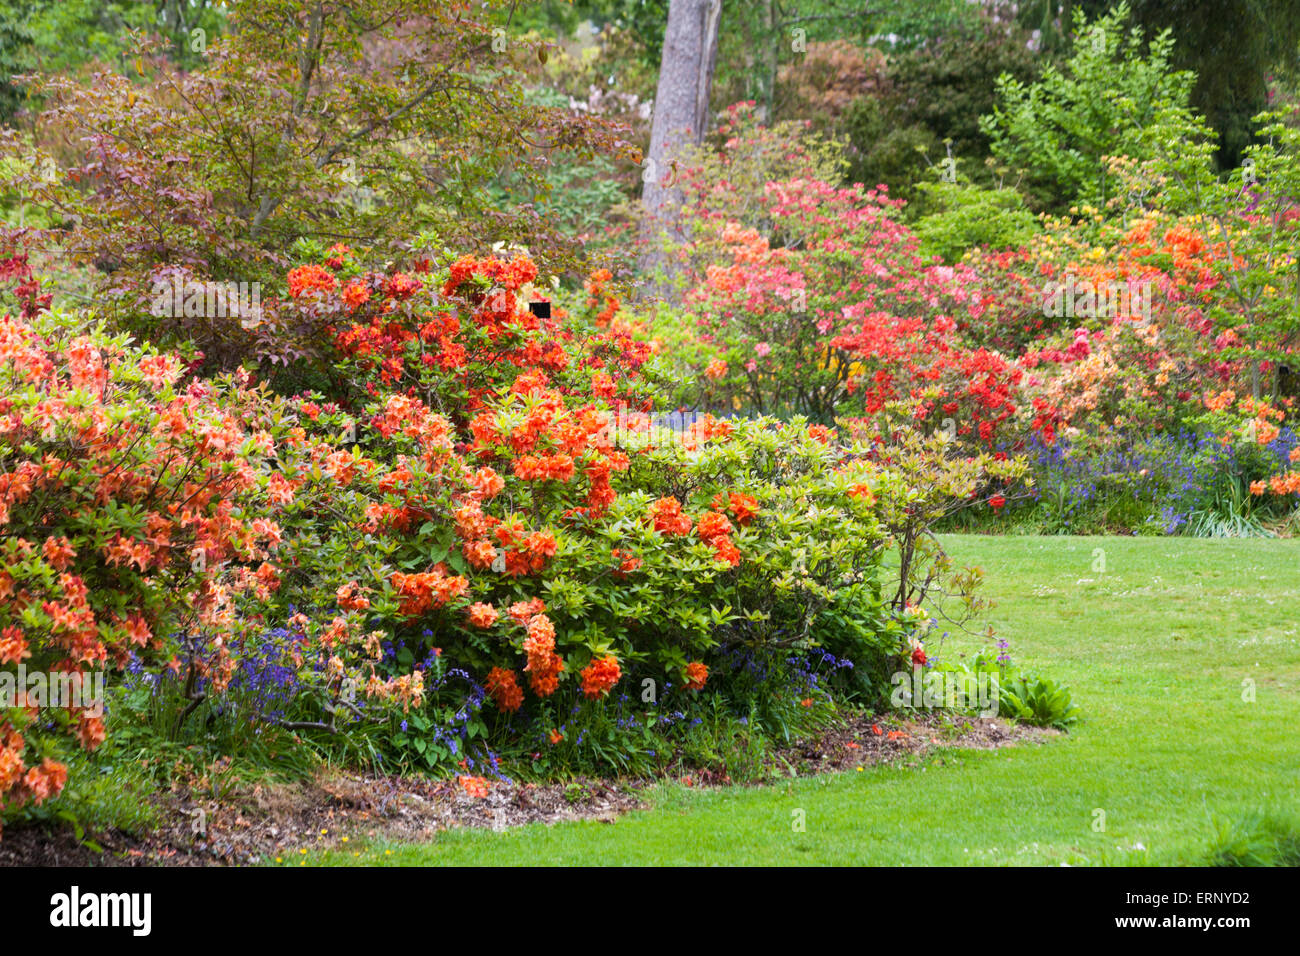 Stunning colourful displays of rhododendrons and azaleas at Exbury Gardens, New Forest National Park, Hampshire, England UK in May Spring Stock Photo